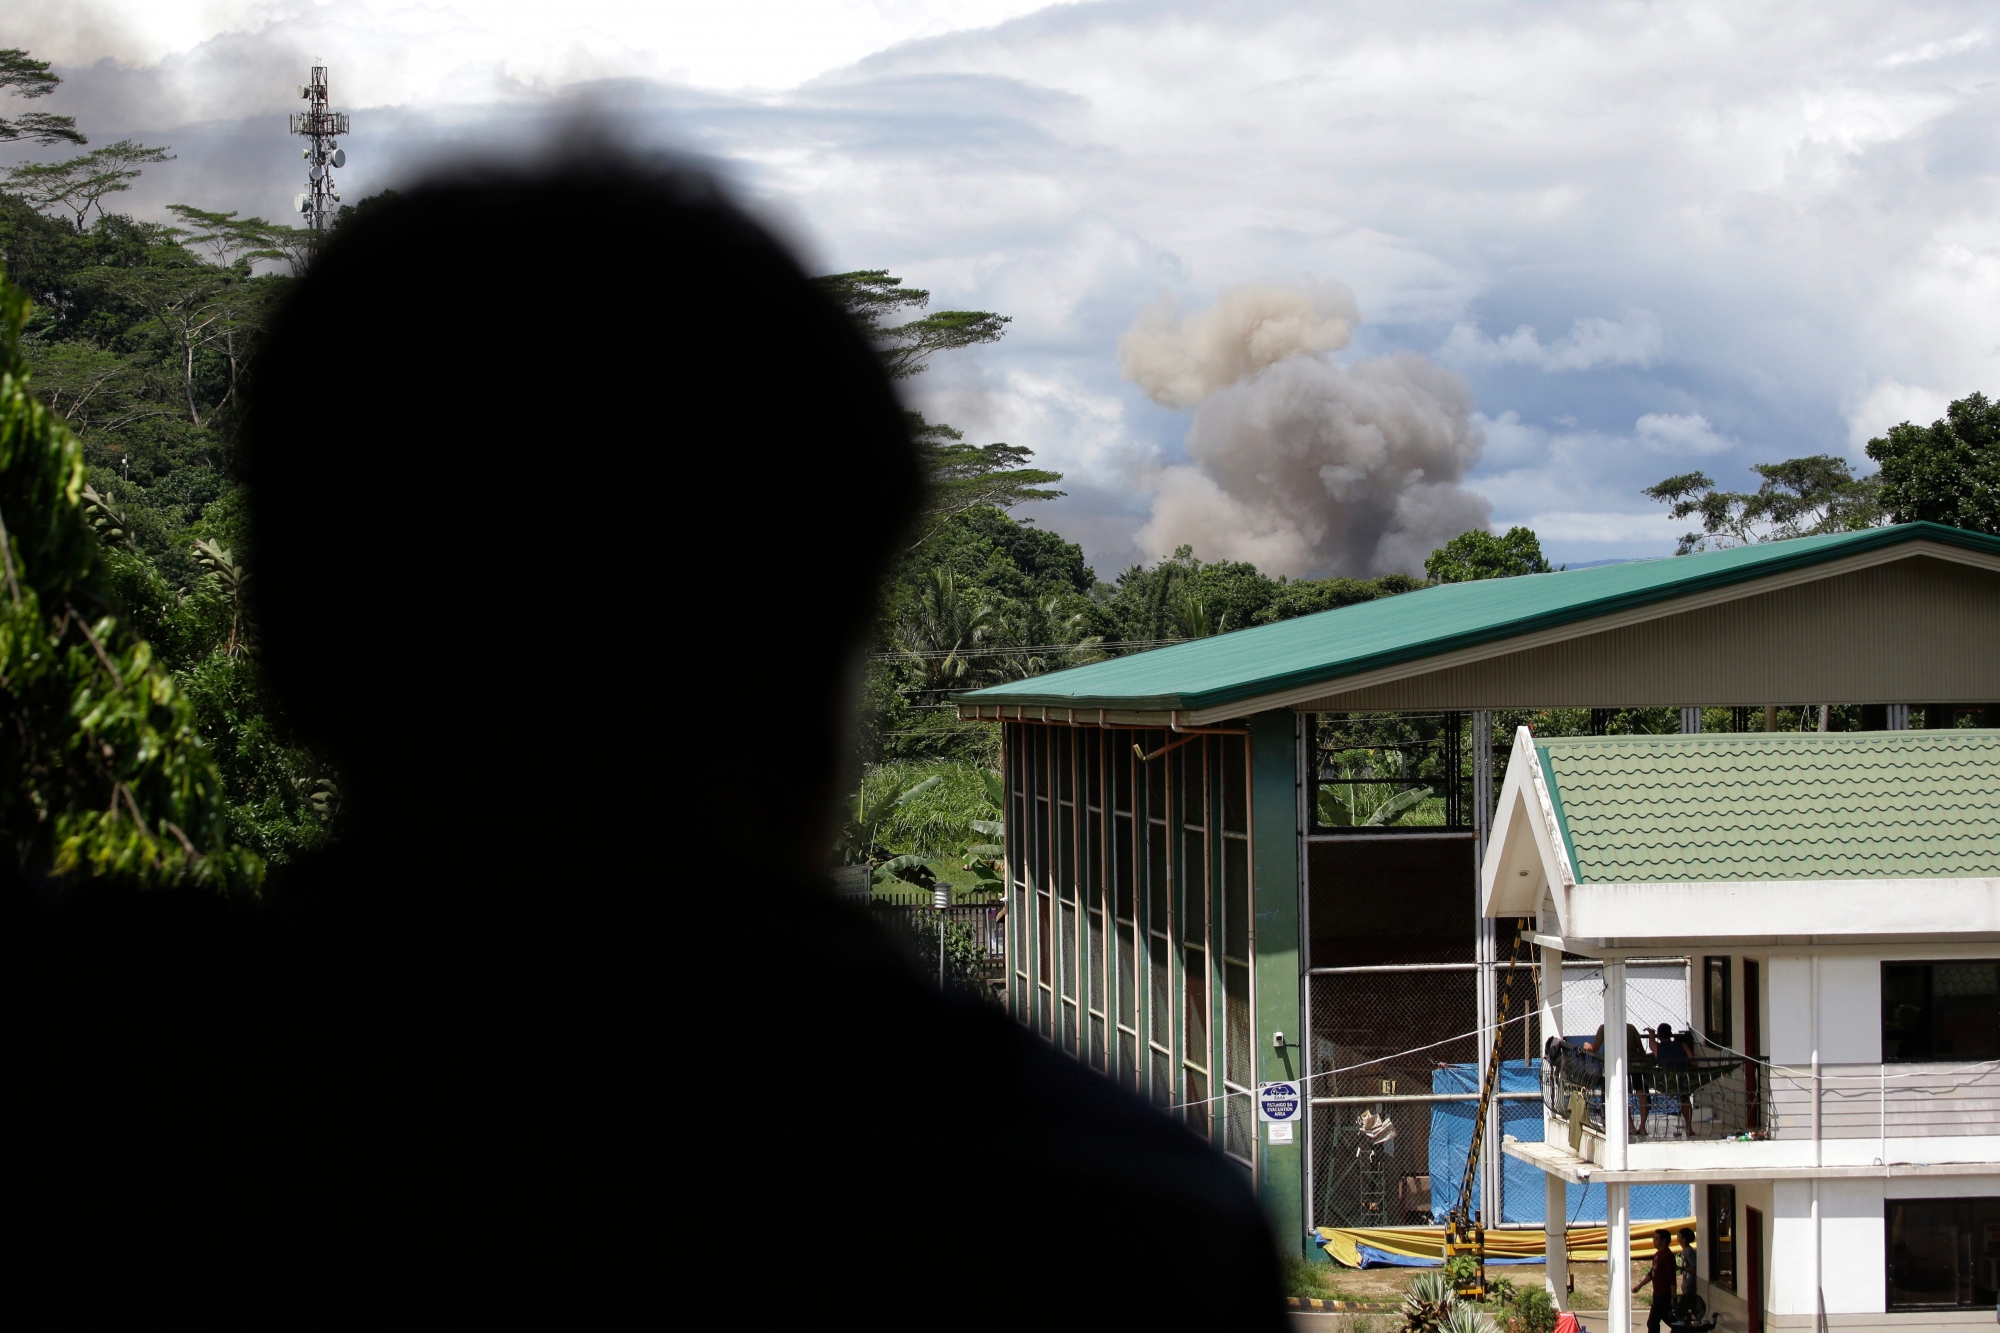 In this Friday, June 9, 2017, photo, an evacuee looks as black smoke rises from continuing military air strikes outside a temporary evacuation center at the provincial government capitol in Marawi city, southern Philippines. Nearly every day for the past three weeks, the Philippine military has pounded the lakeside town of Marawi with rockets and bombs as it tries to wipe out militants linked to the Islamic State group in some of the most protracted urban combat to hit this volatile region in decades. (AP Photo/Aaron Favila) Philippines A Window To War